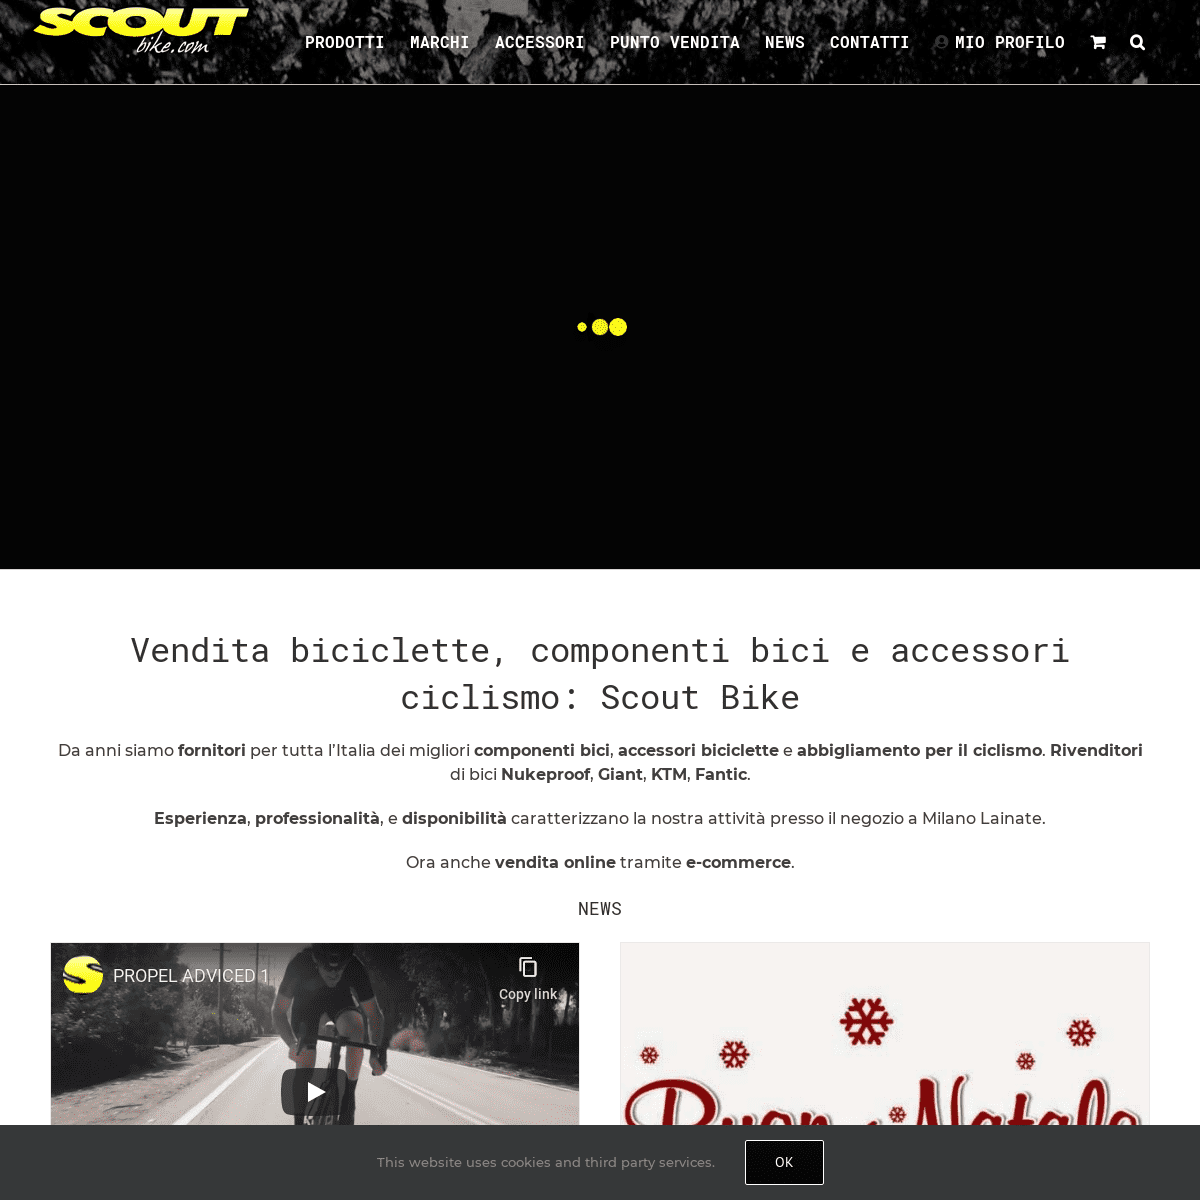 A complete backup of scoutbike.com